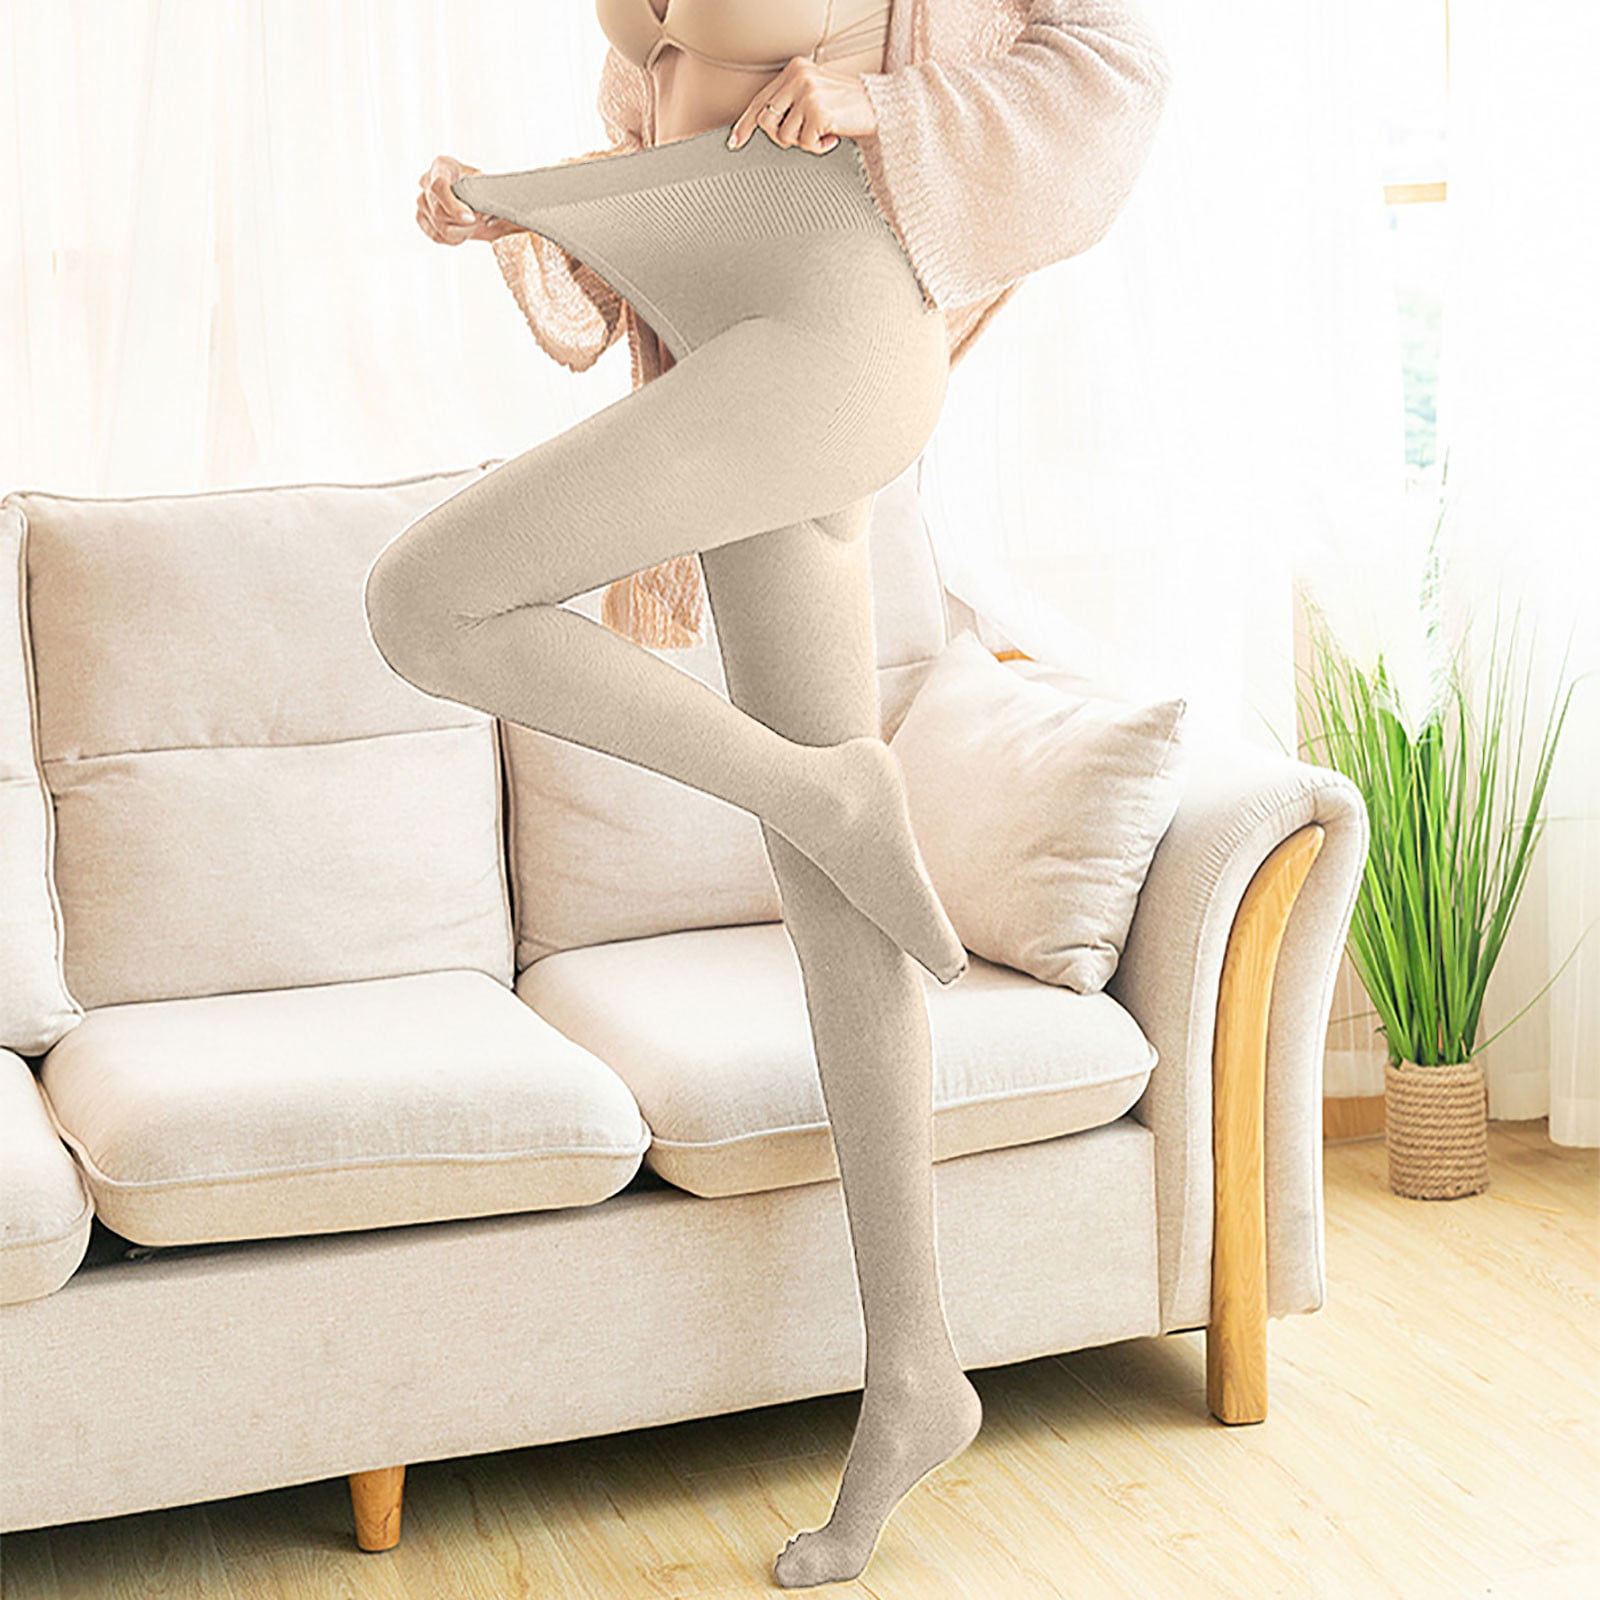 Lolmot Winter Thermal Tights Solid Color Anti-Slip Stockings